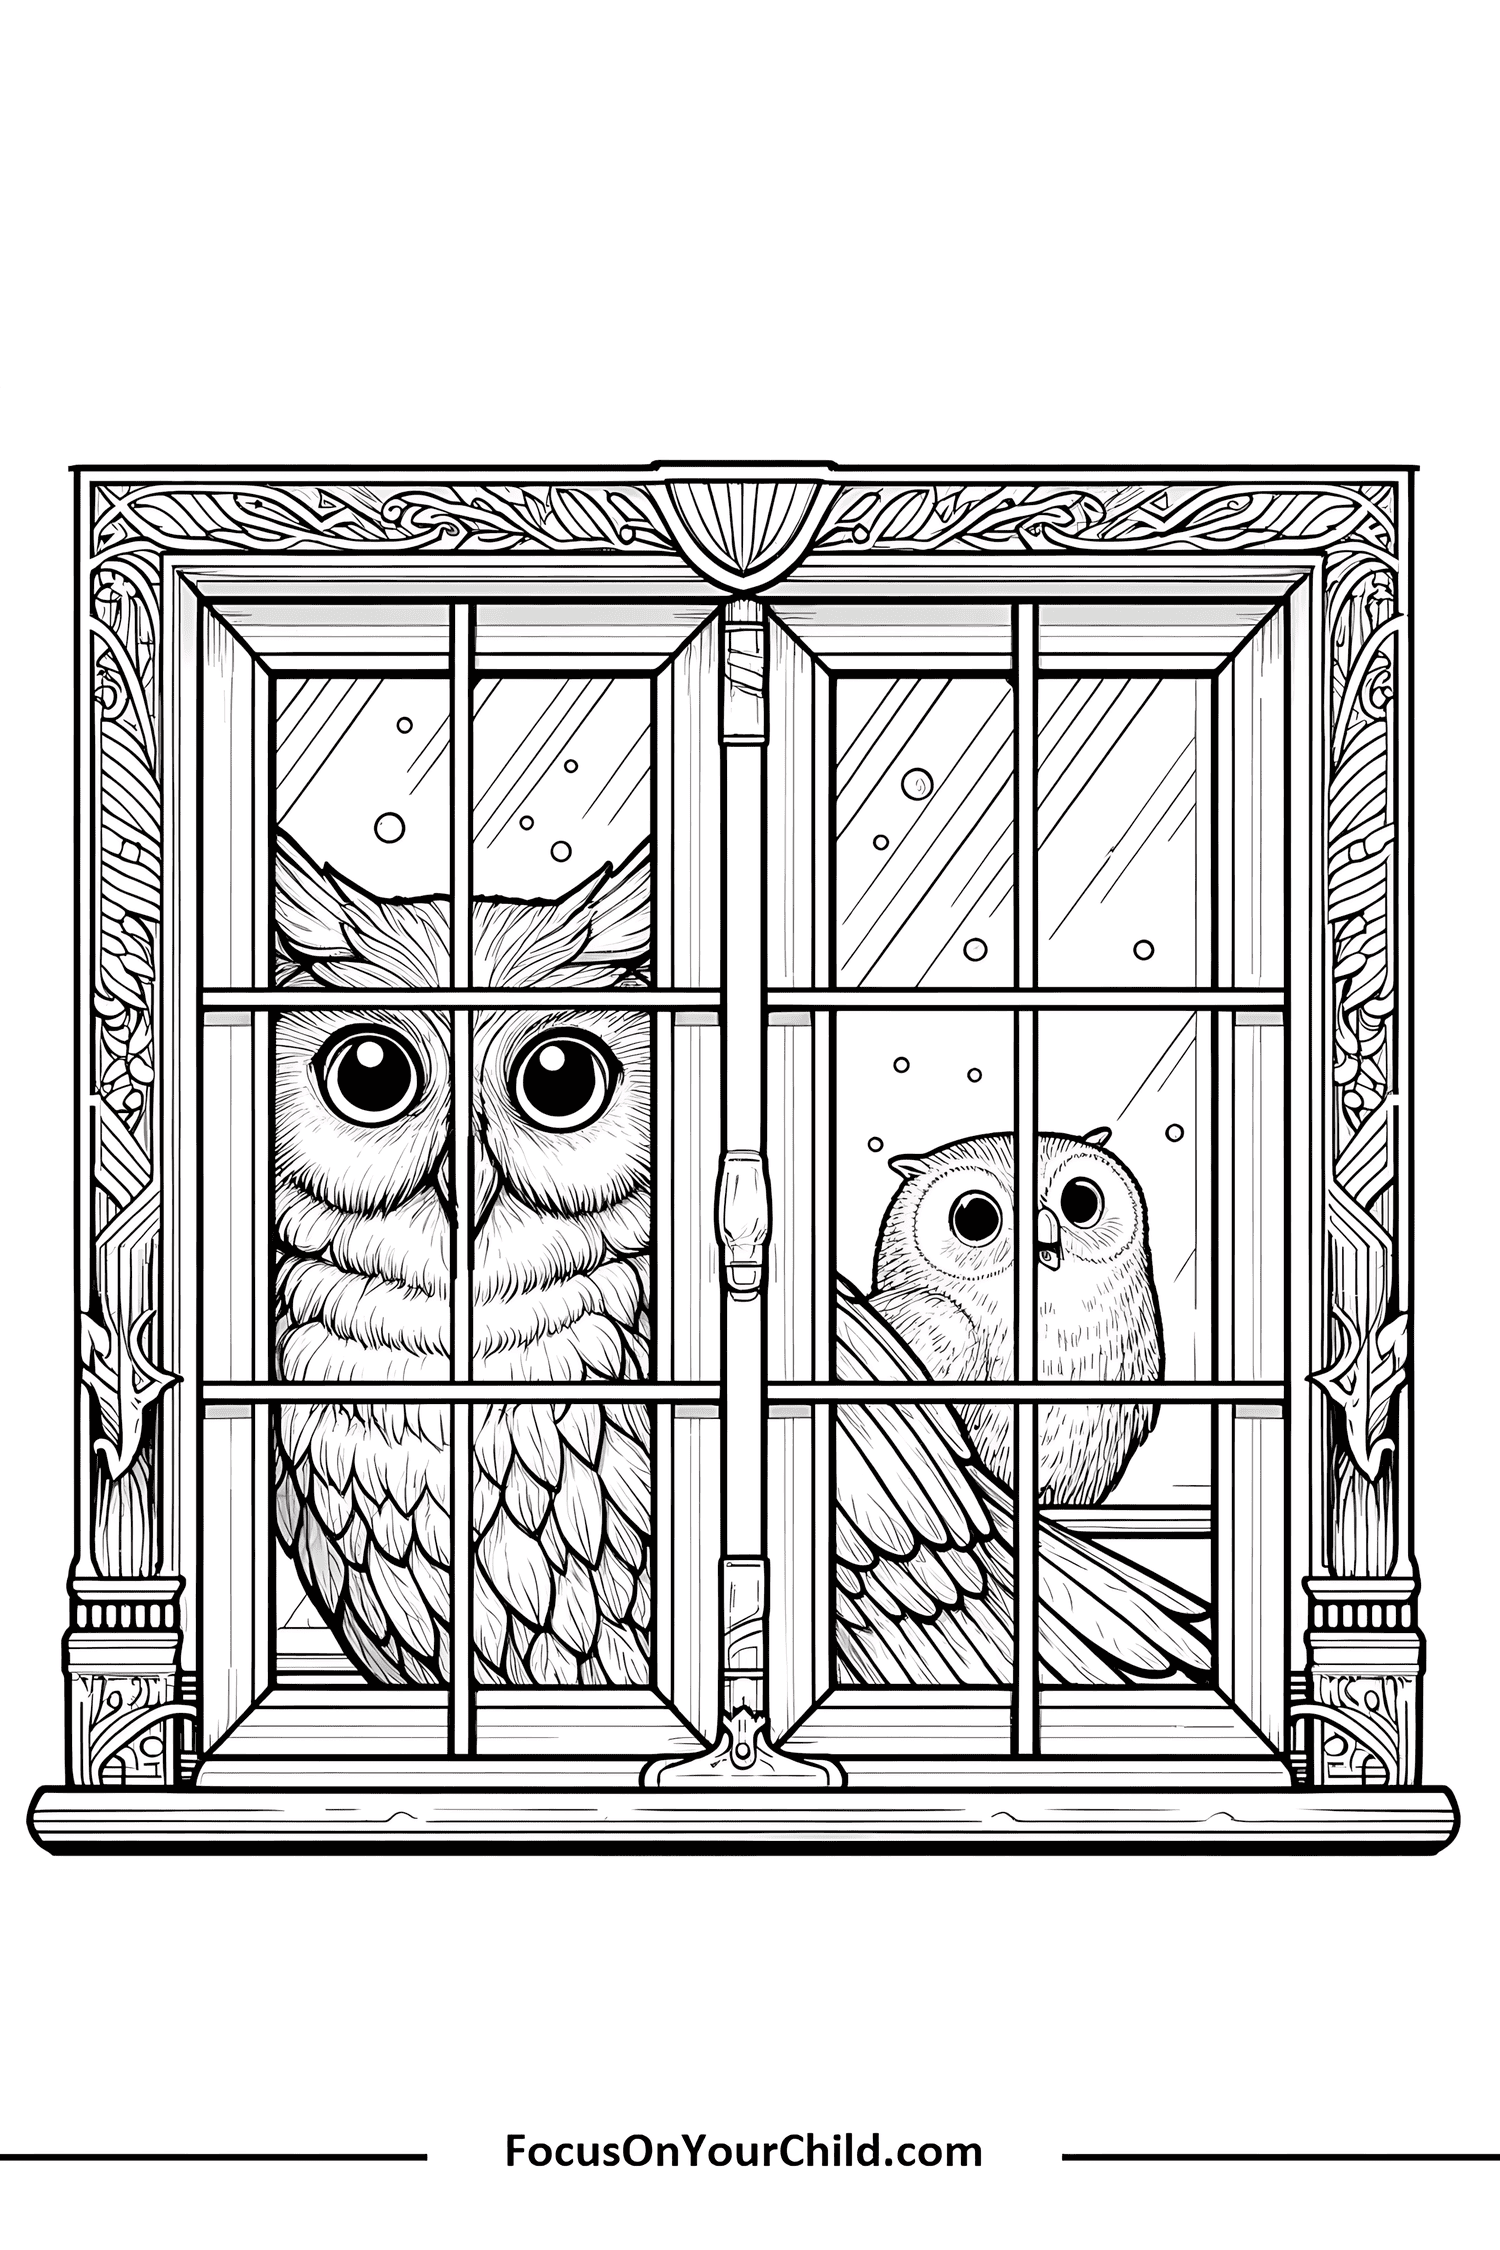 Owls Perched Behind Ornate Window Frame.